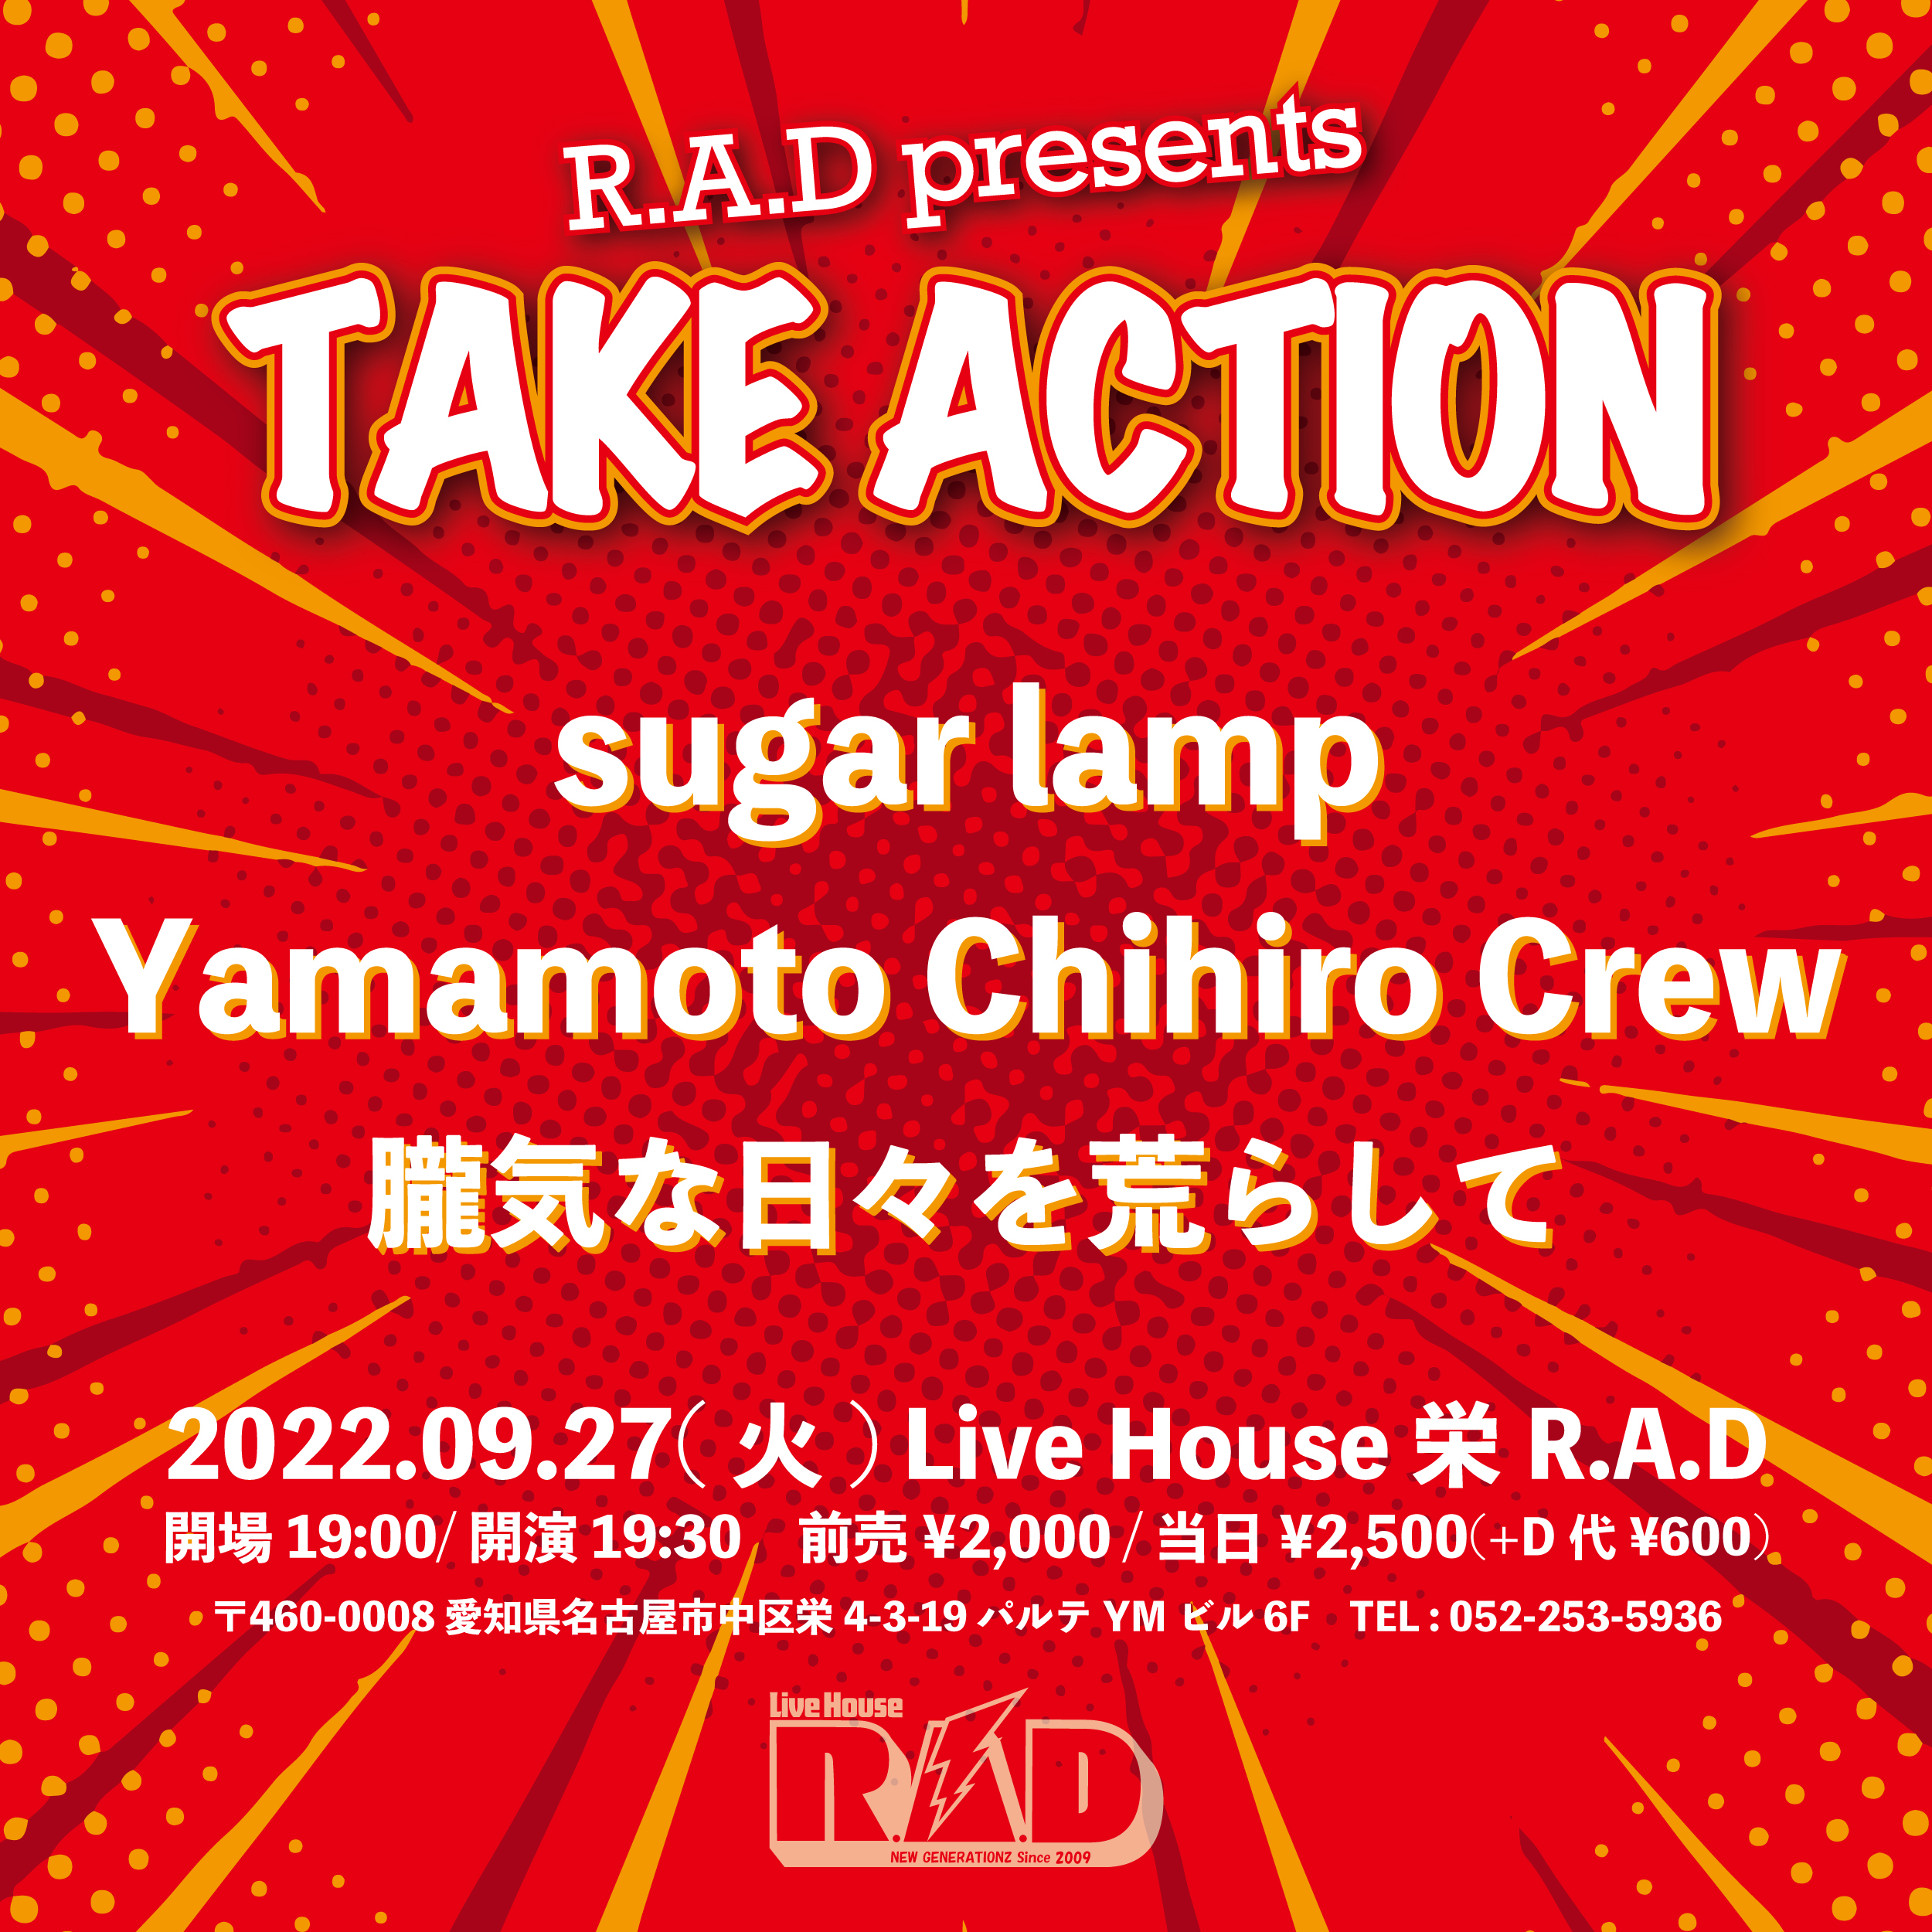 R.A.D presents "TAKE ACTION"